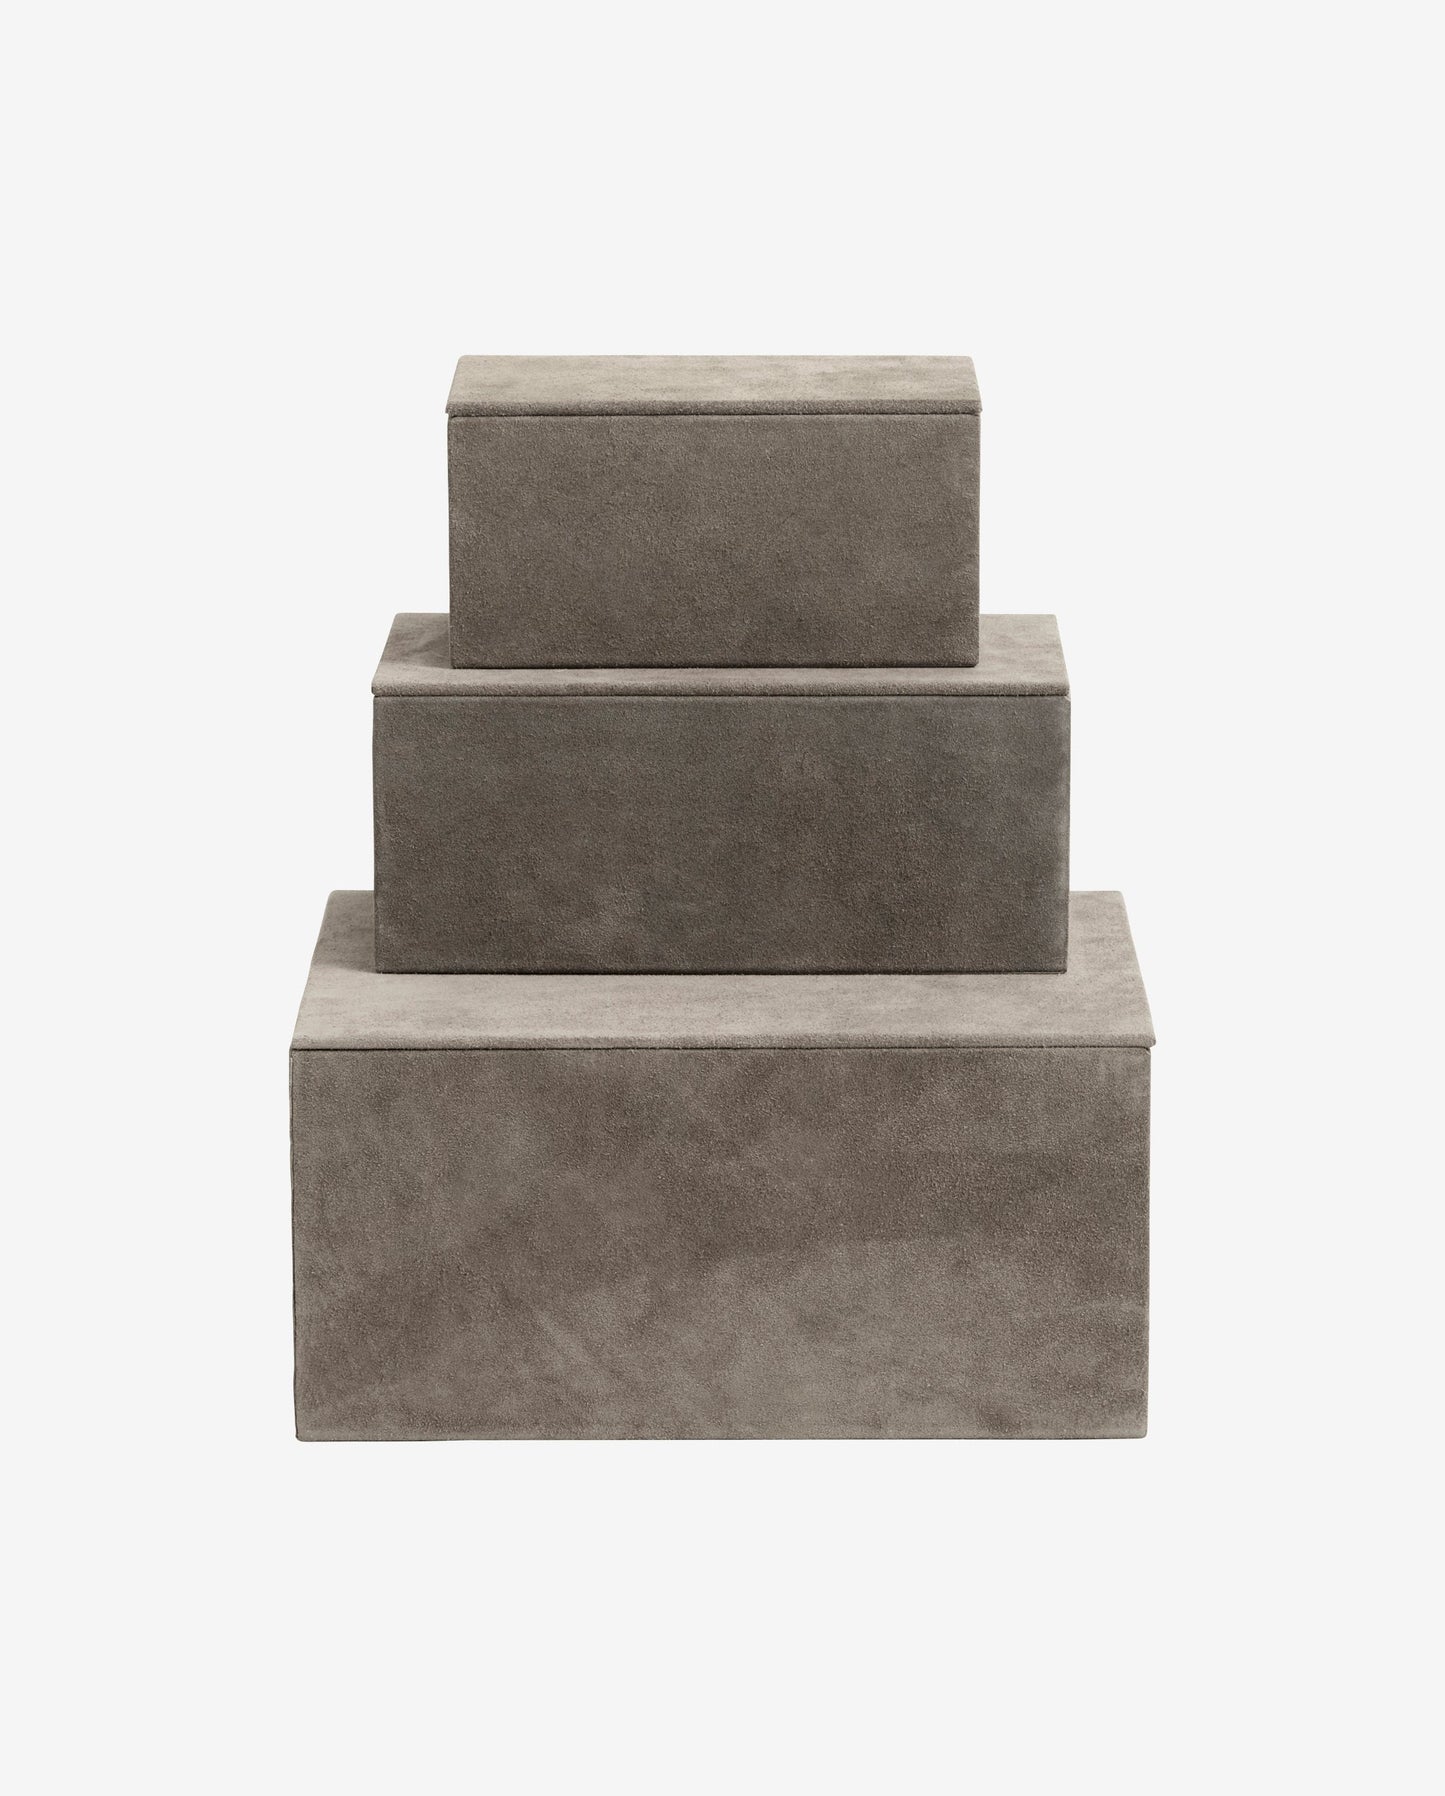 Nordal BOX set/3, greyish brown, suede leather